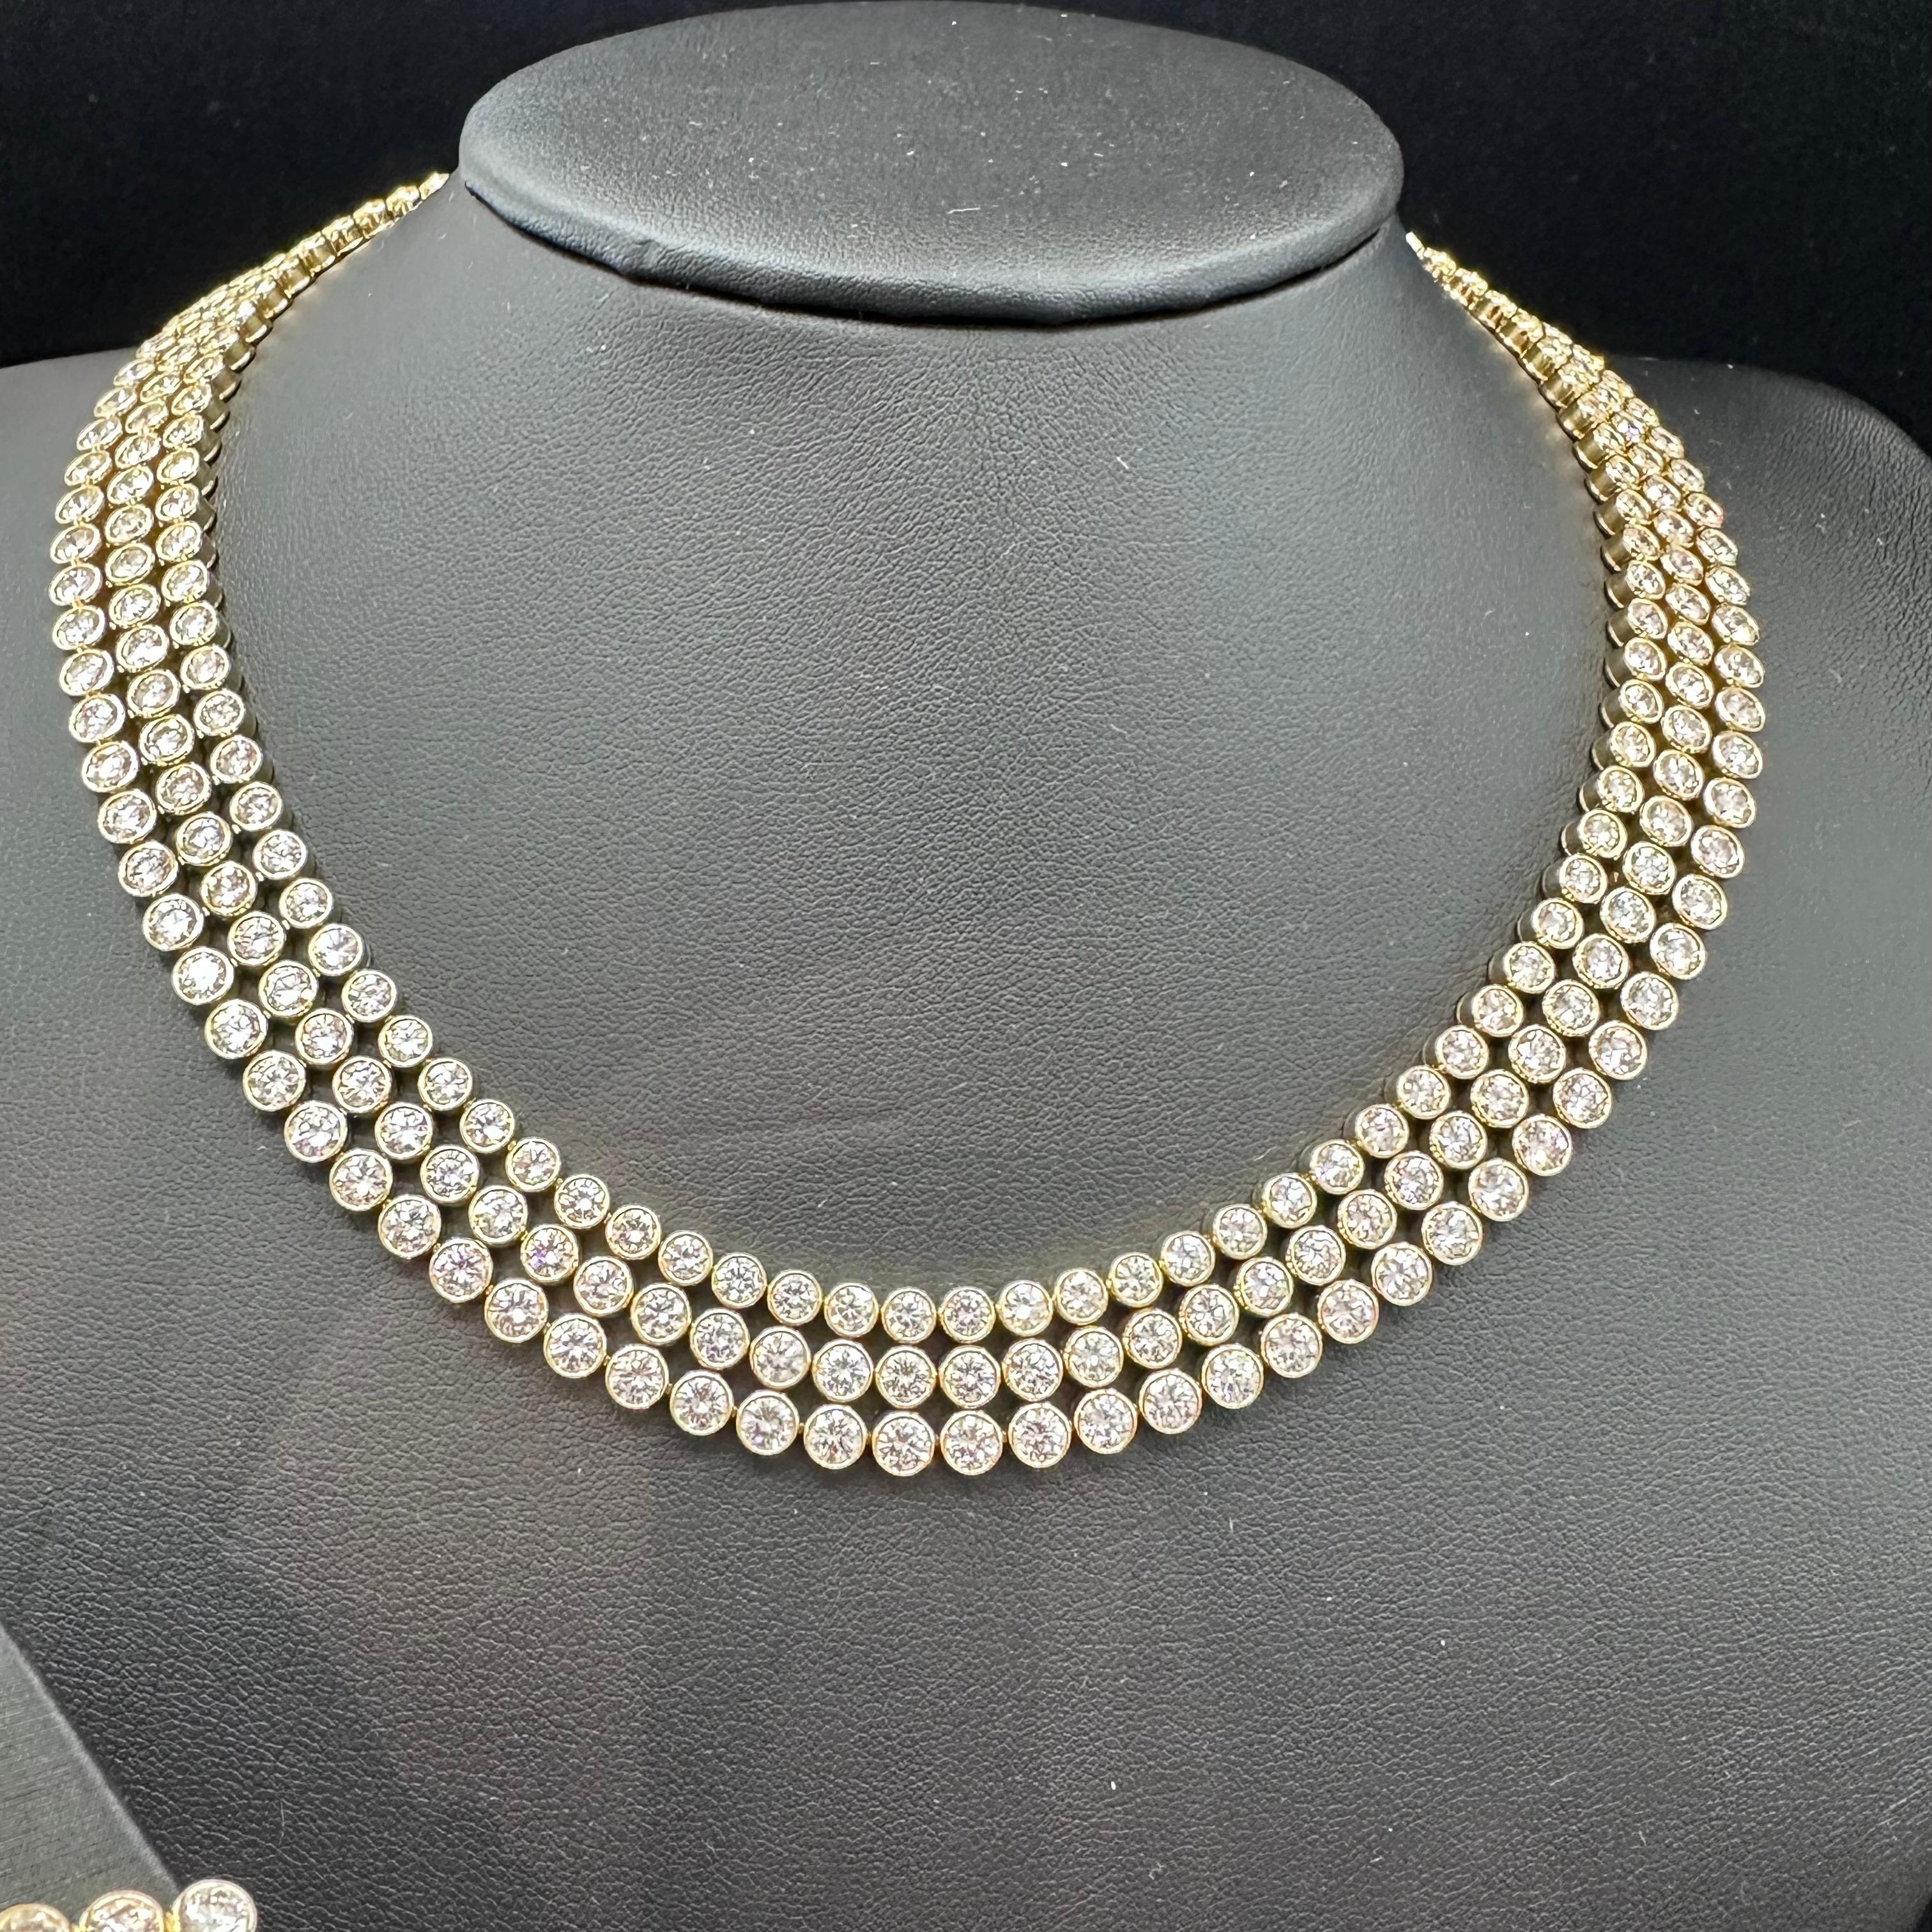 Harry Winston, Diamond Necklace, Bracelet and Earring set, Circa 1990's
282 diamonds with a Total Diamond Weight 73.60cts
Necklace 40 carats 
Bracelet 22.80 cts 
Earrings 10.80 cts
Diamond Quality: D-E Color and VVS clarity 
18 karat yellow gold